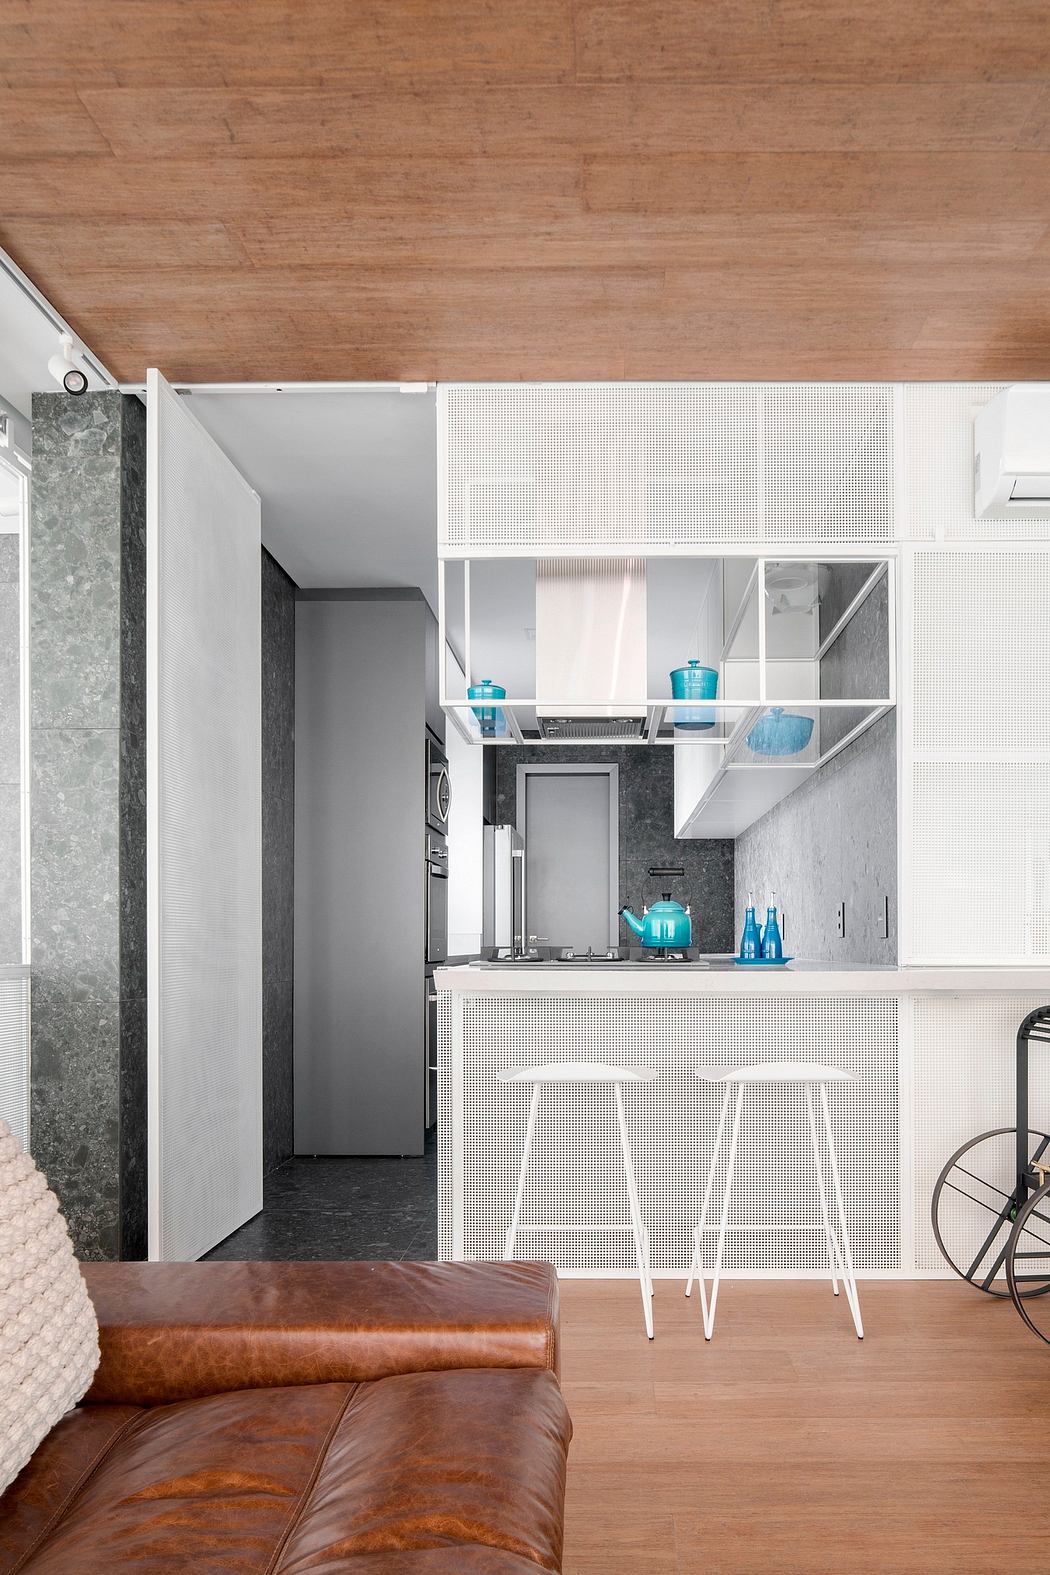 This modern studio apartment features a minimalist, open-plan layout with sleek kitchen cabinetry and bar stools.